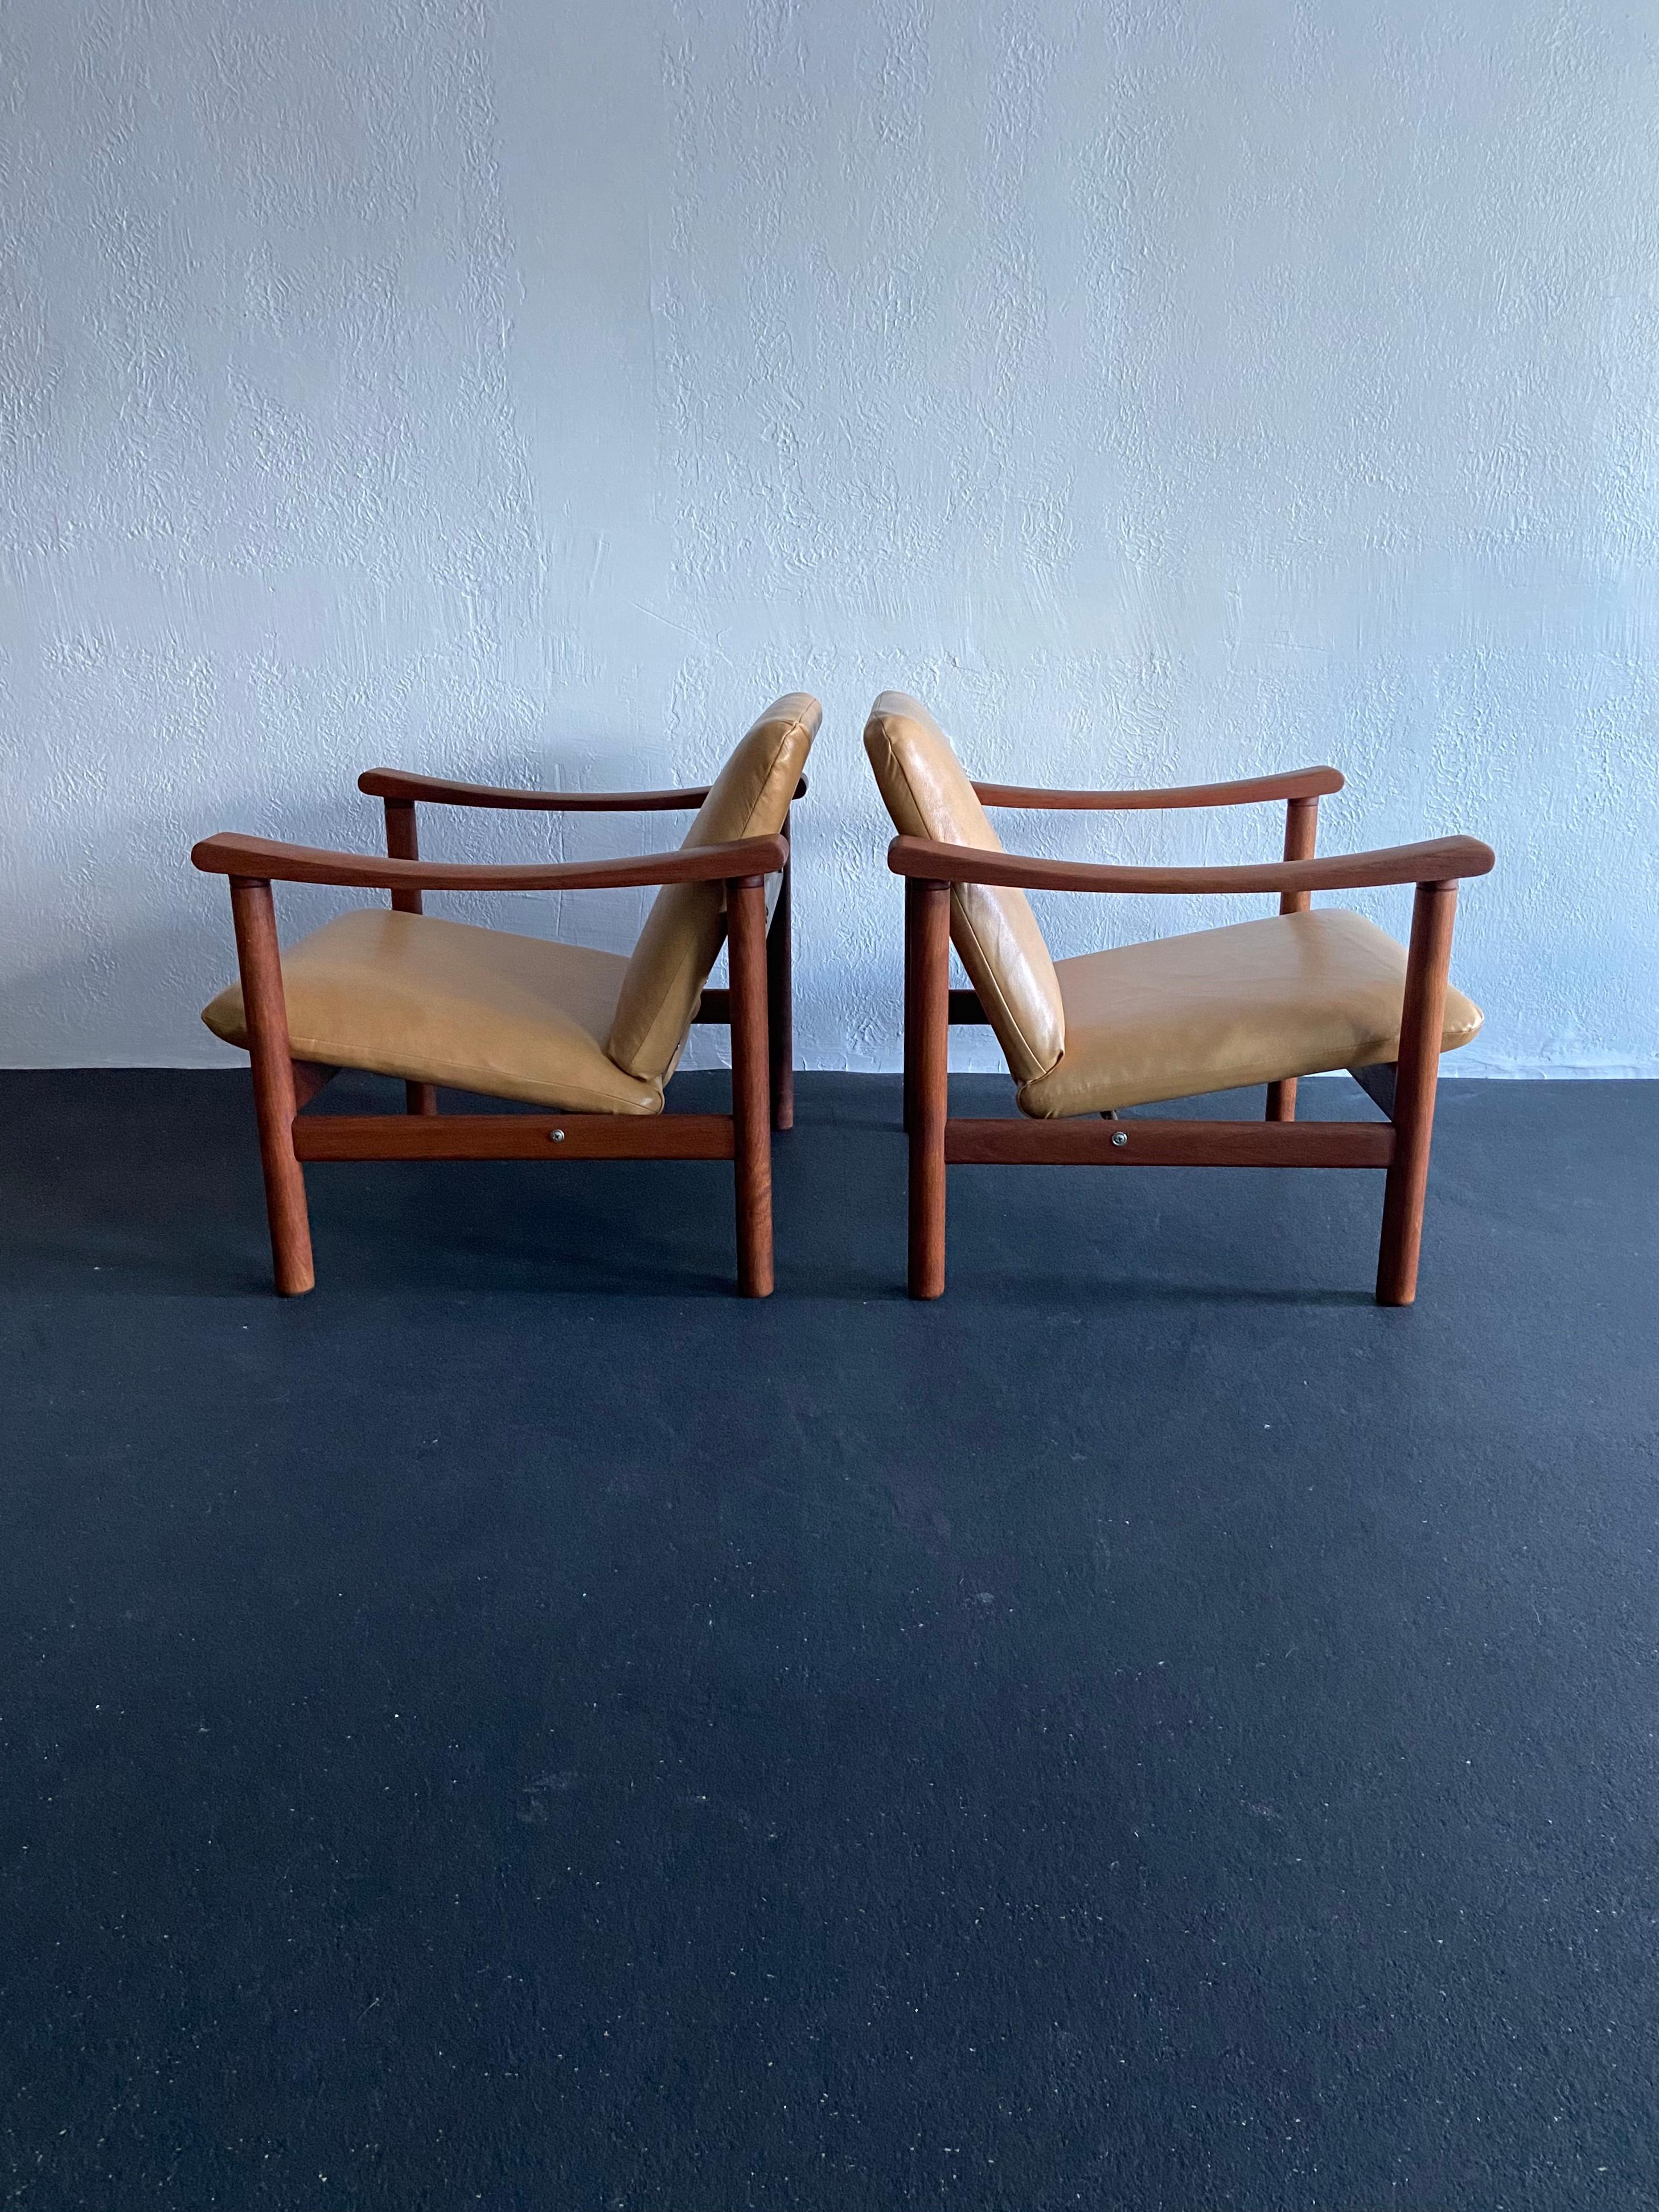 Mid-Century Modern Hans Wegner for Getama Leather Lounge Chairs - a Pair For Sale